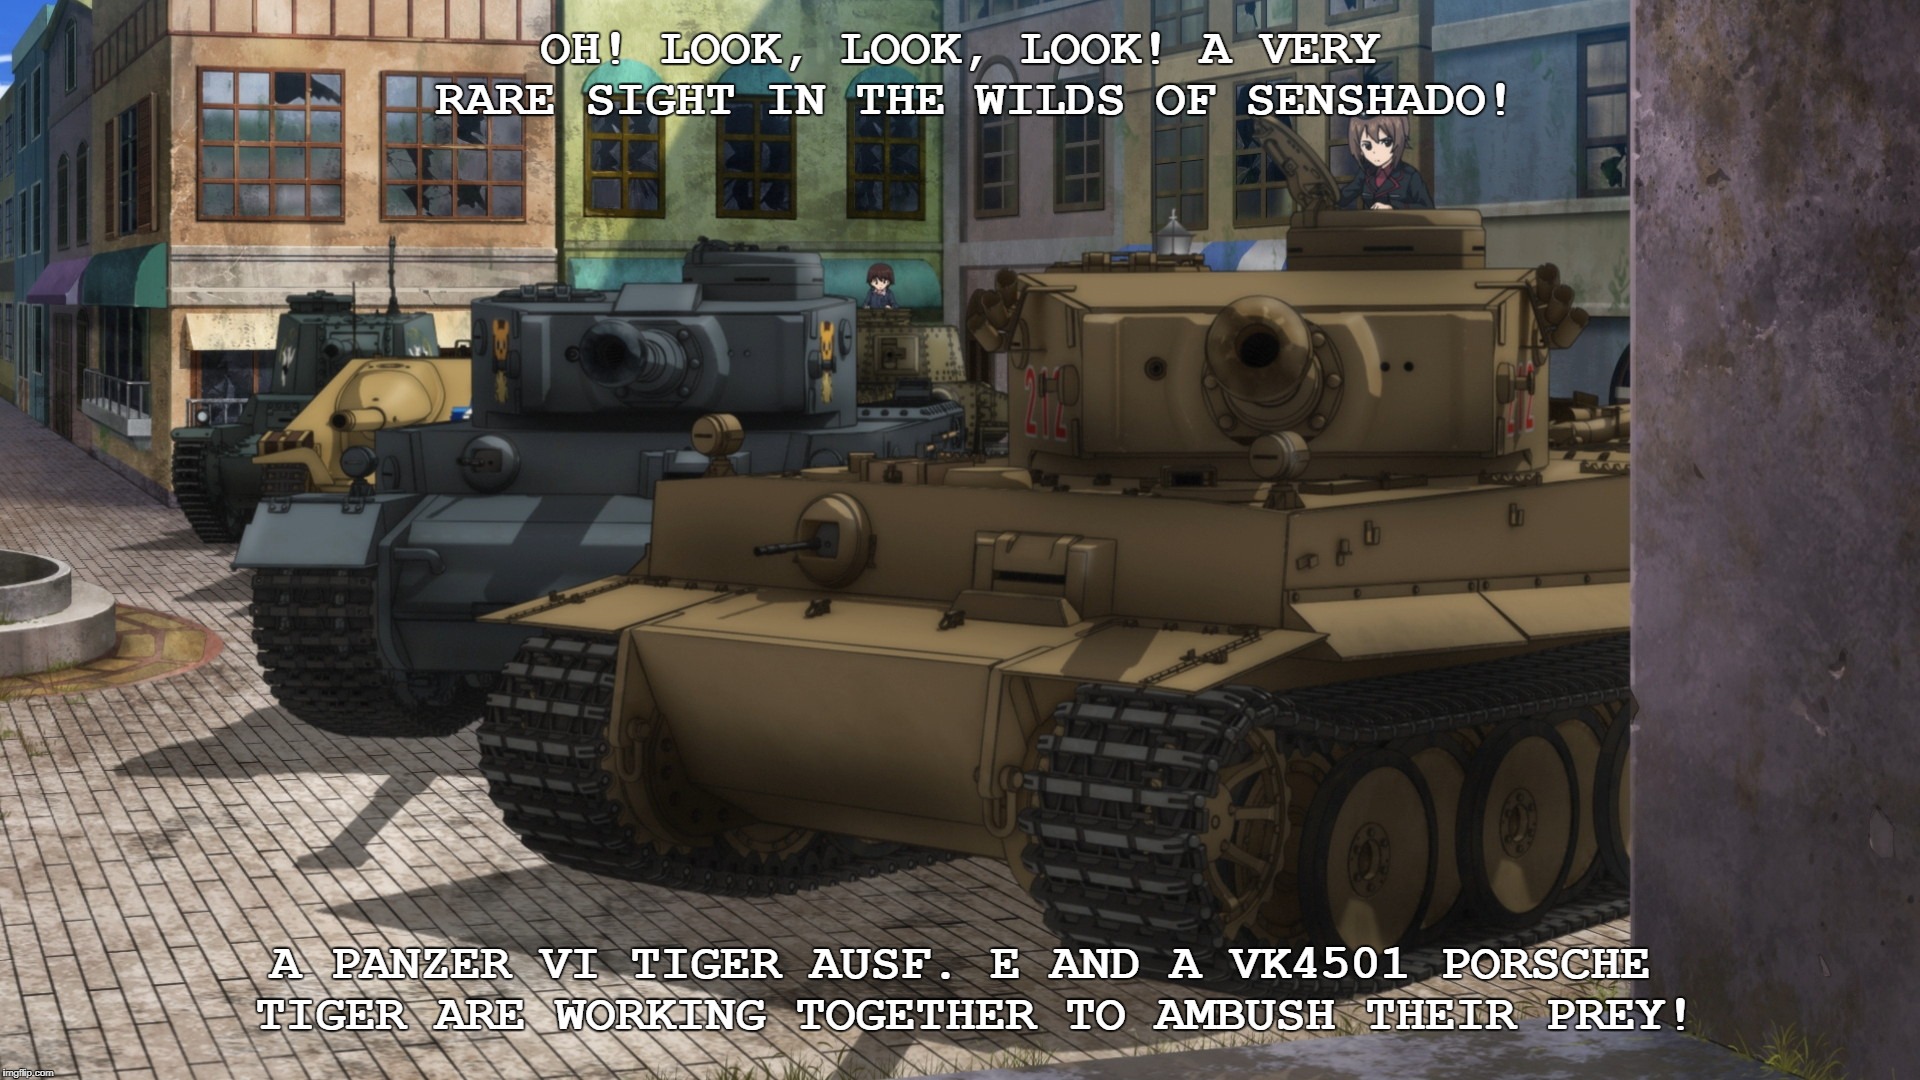 A rare sight in Senshado! | OH! LOOK, LOOK, LOOK! A VERY RARE SIGHT IN THE WILDS OF SENSHADO! A PANZER VI TIGER AUSF. E AND A VK4501 PORSCHE TIGER ARE WORKING TOGETHER TO AMBUSH THEIR PREY! | image tagged in anime,girls und panzer,gup | made w/ Imgflip meme maker